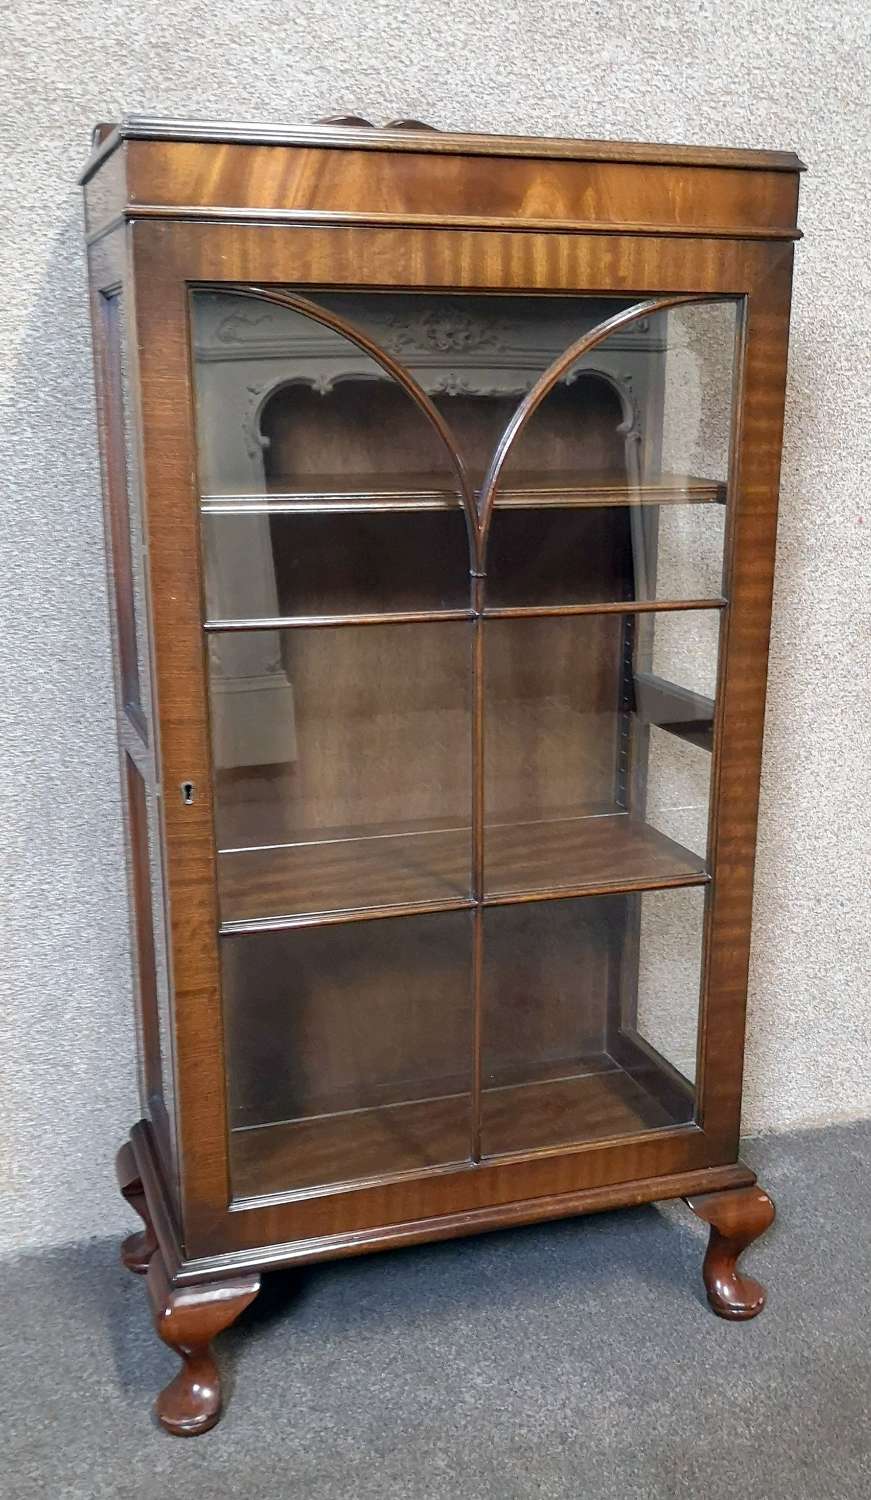 Small Mahogany Display / China Cabinet In The Queen Anne Style